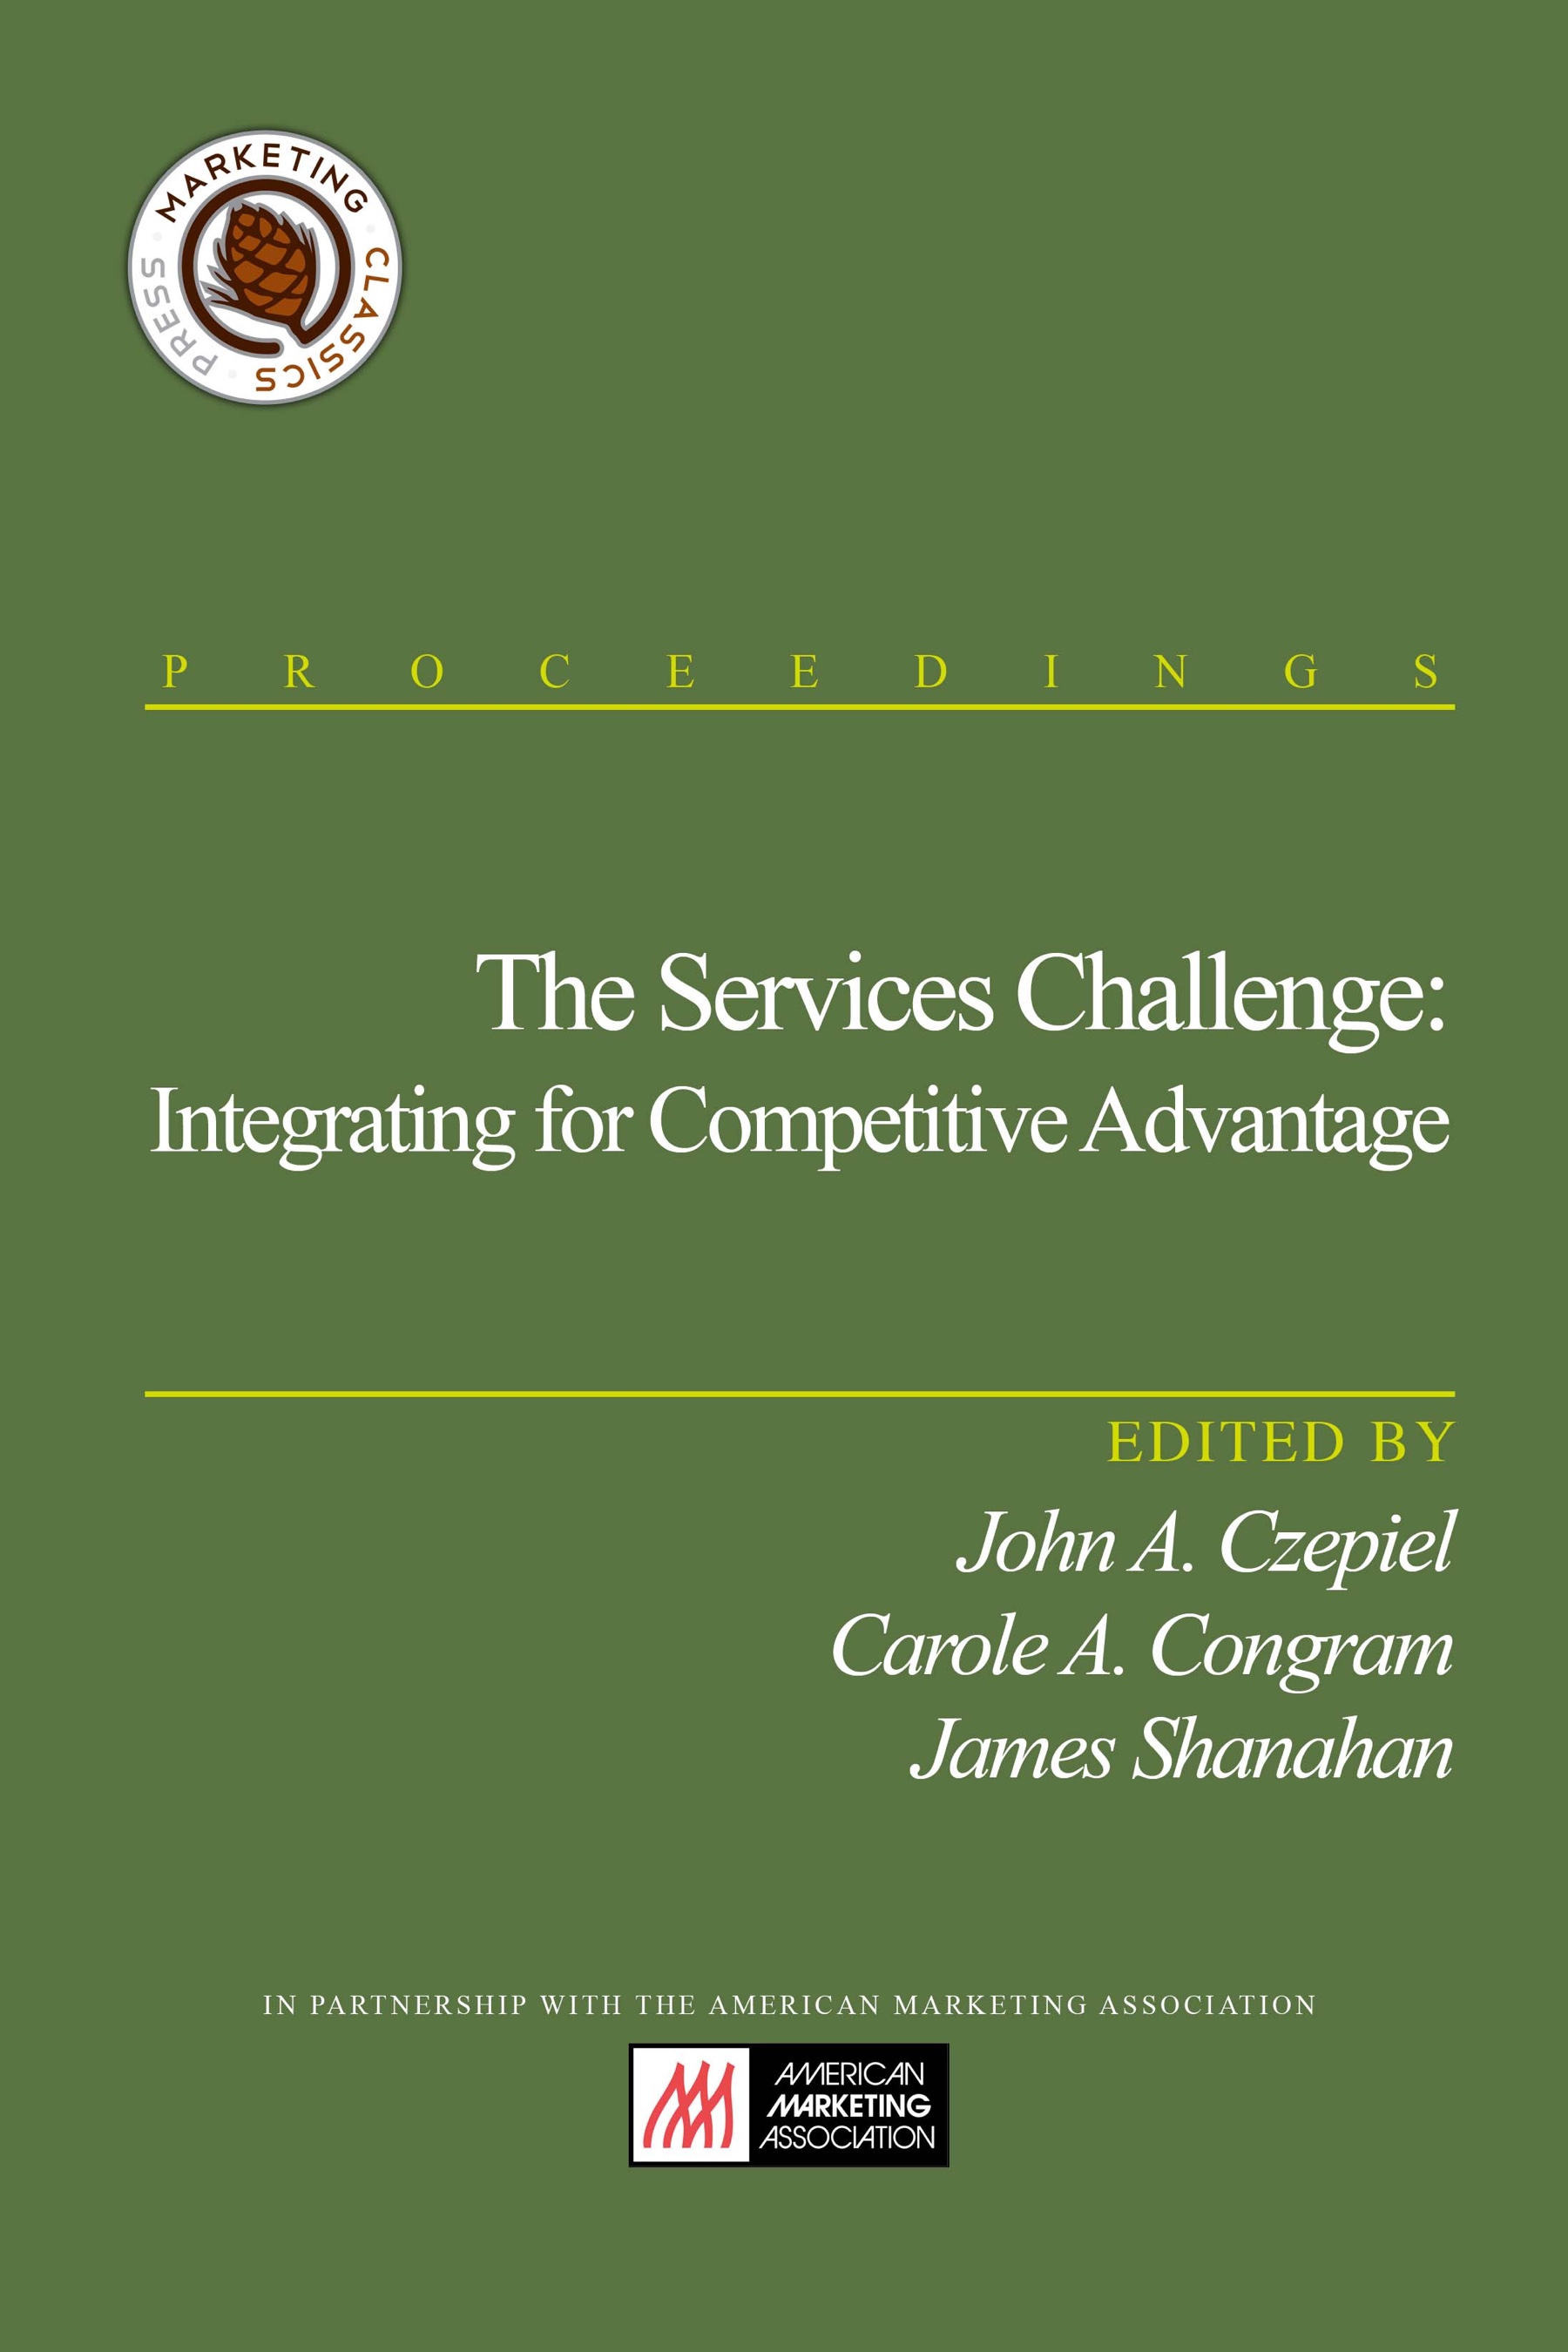 The Services Challenge Integrating For Competitive Advantage